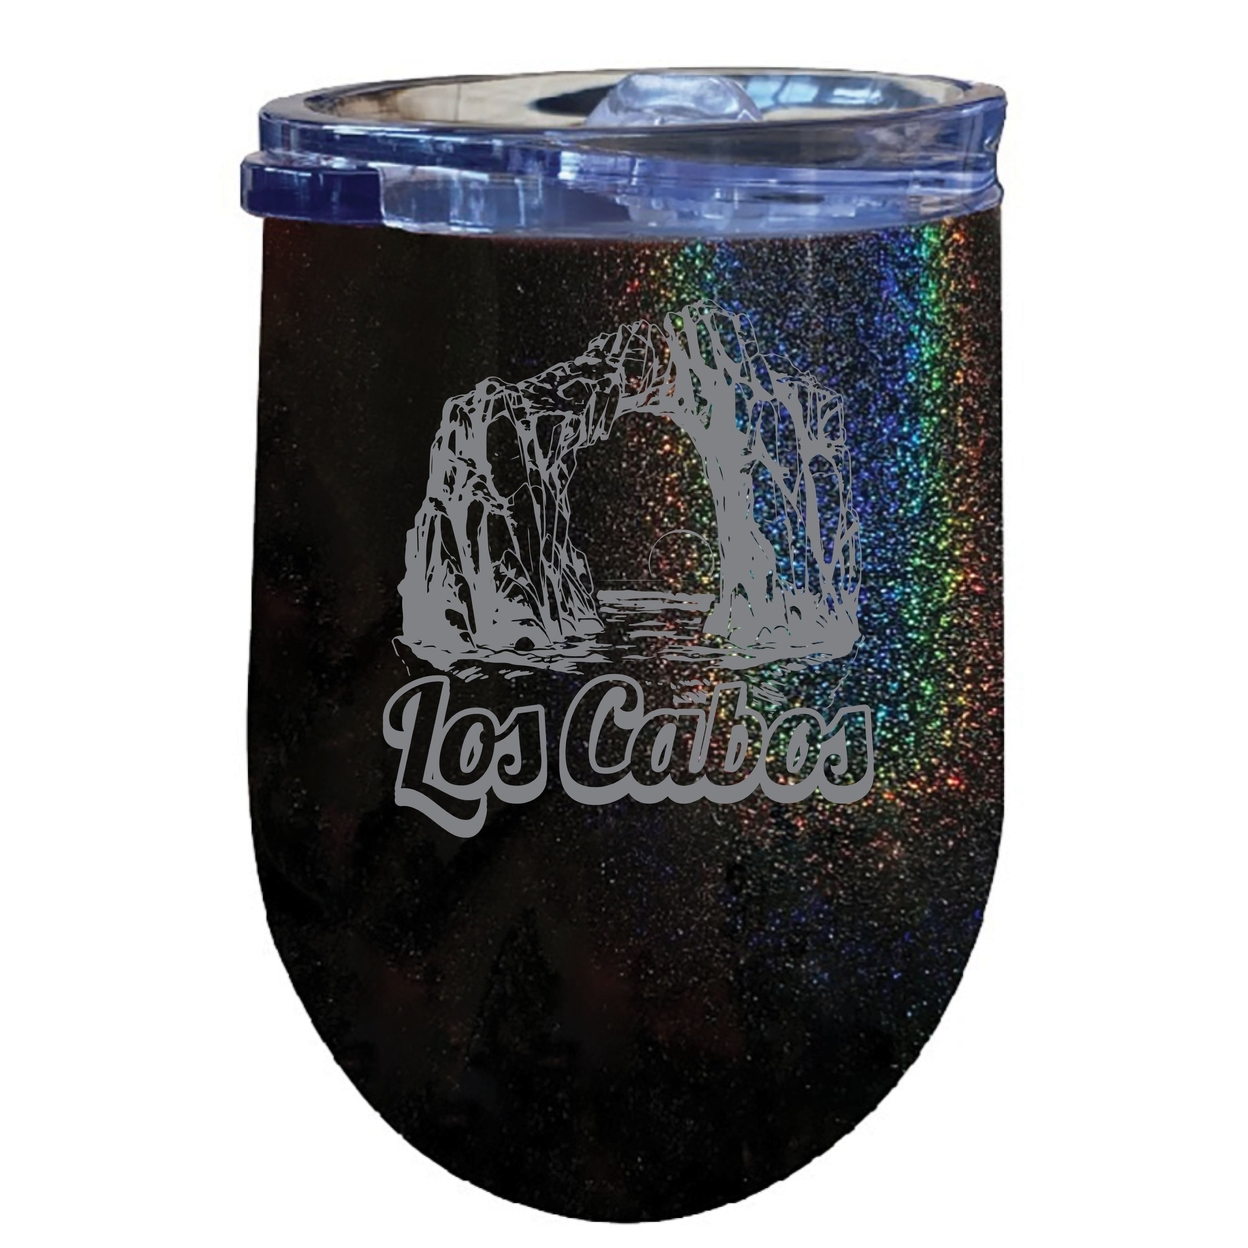 Los Cabos Mexico Souvenir 12 Oz Engraved Insulated Wine Stainless Steel Tumbler - Seafoam,,2-Pack